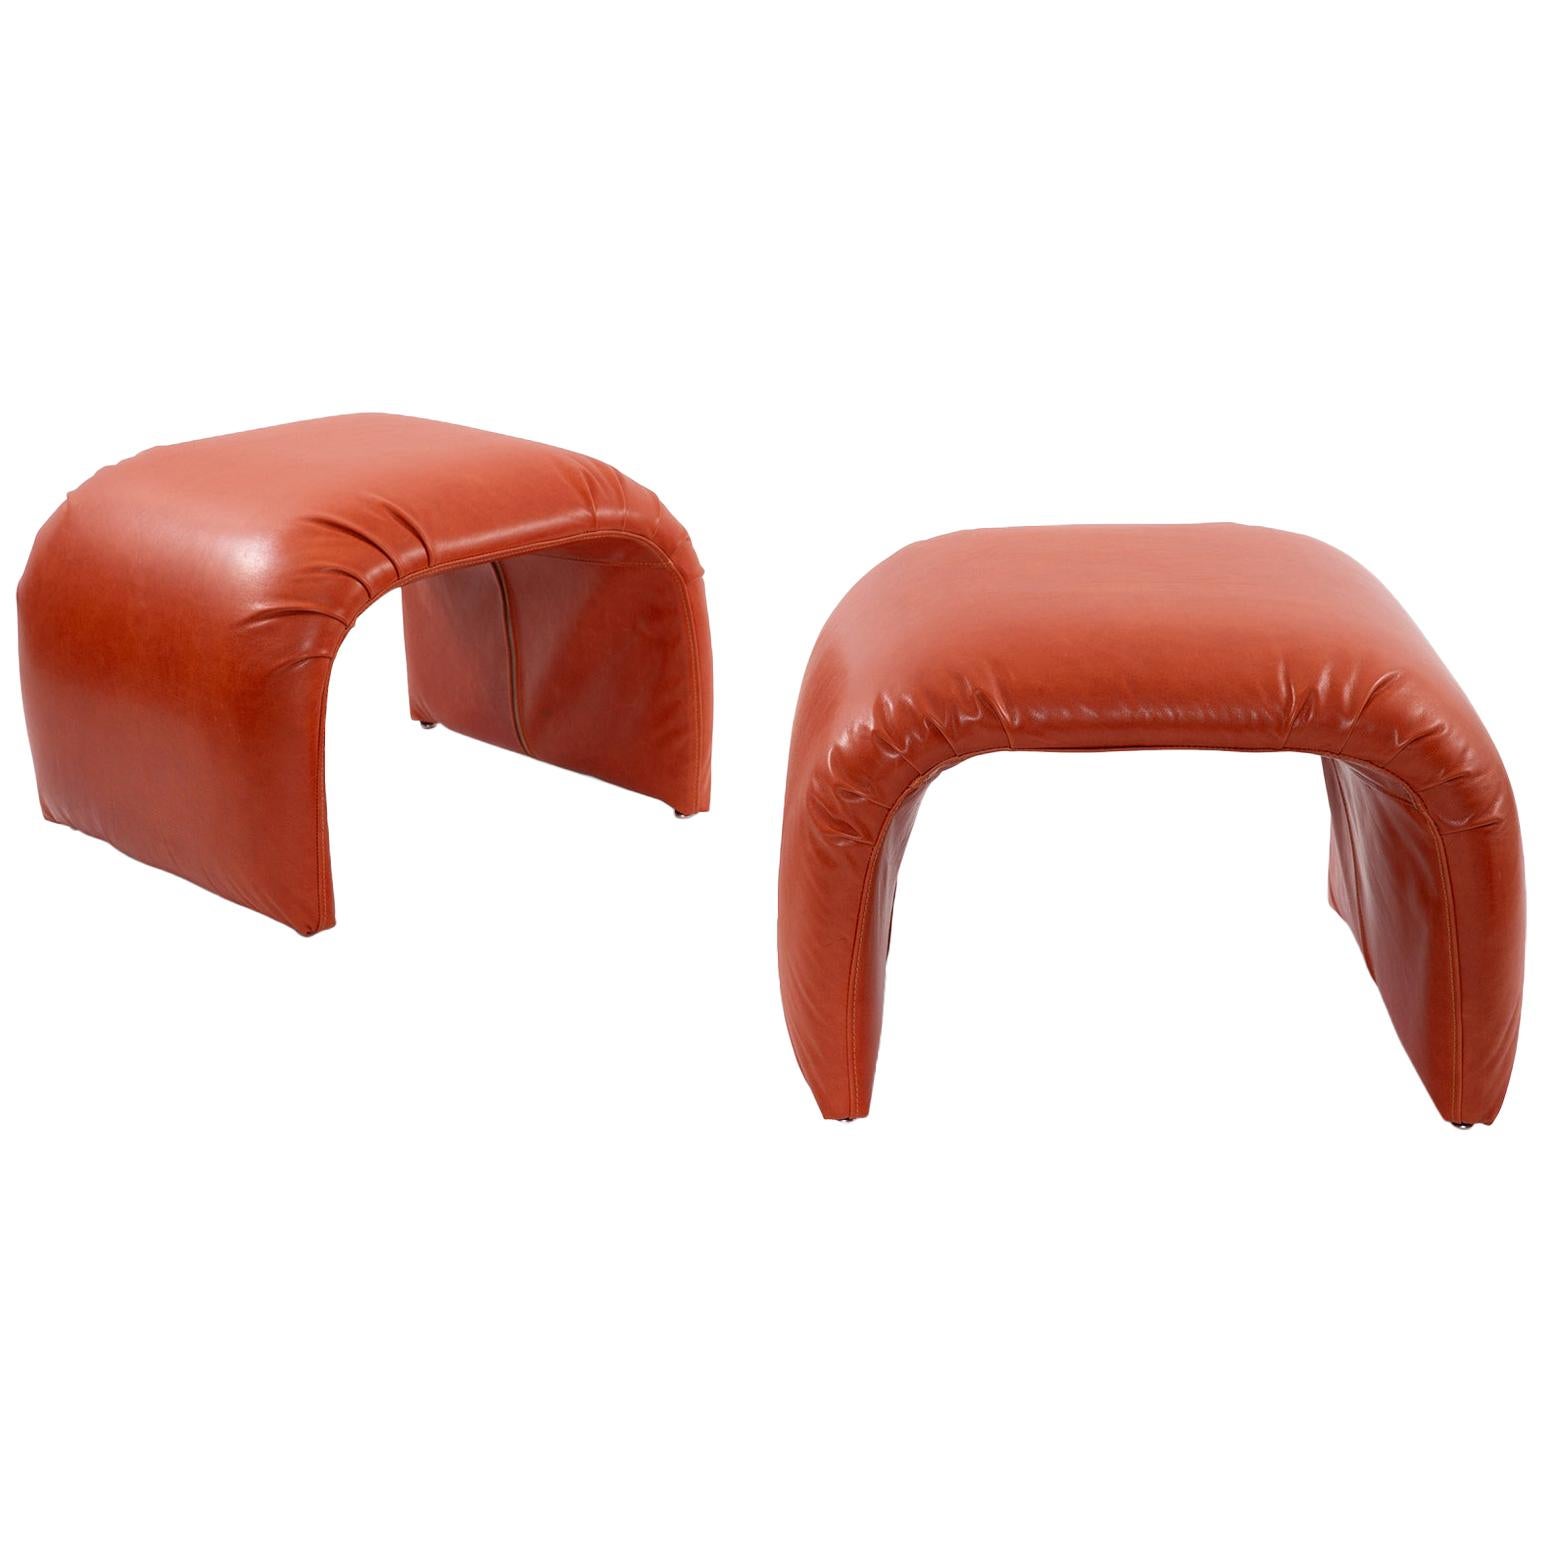 Pair of Persimmon Directional Waterfall Leather Ottomans